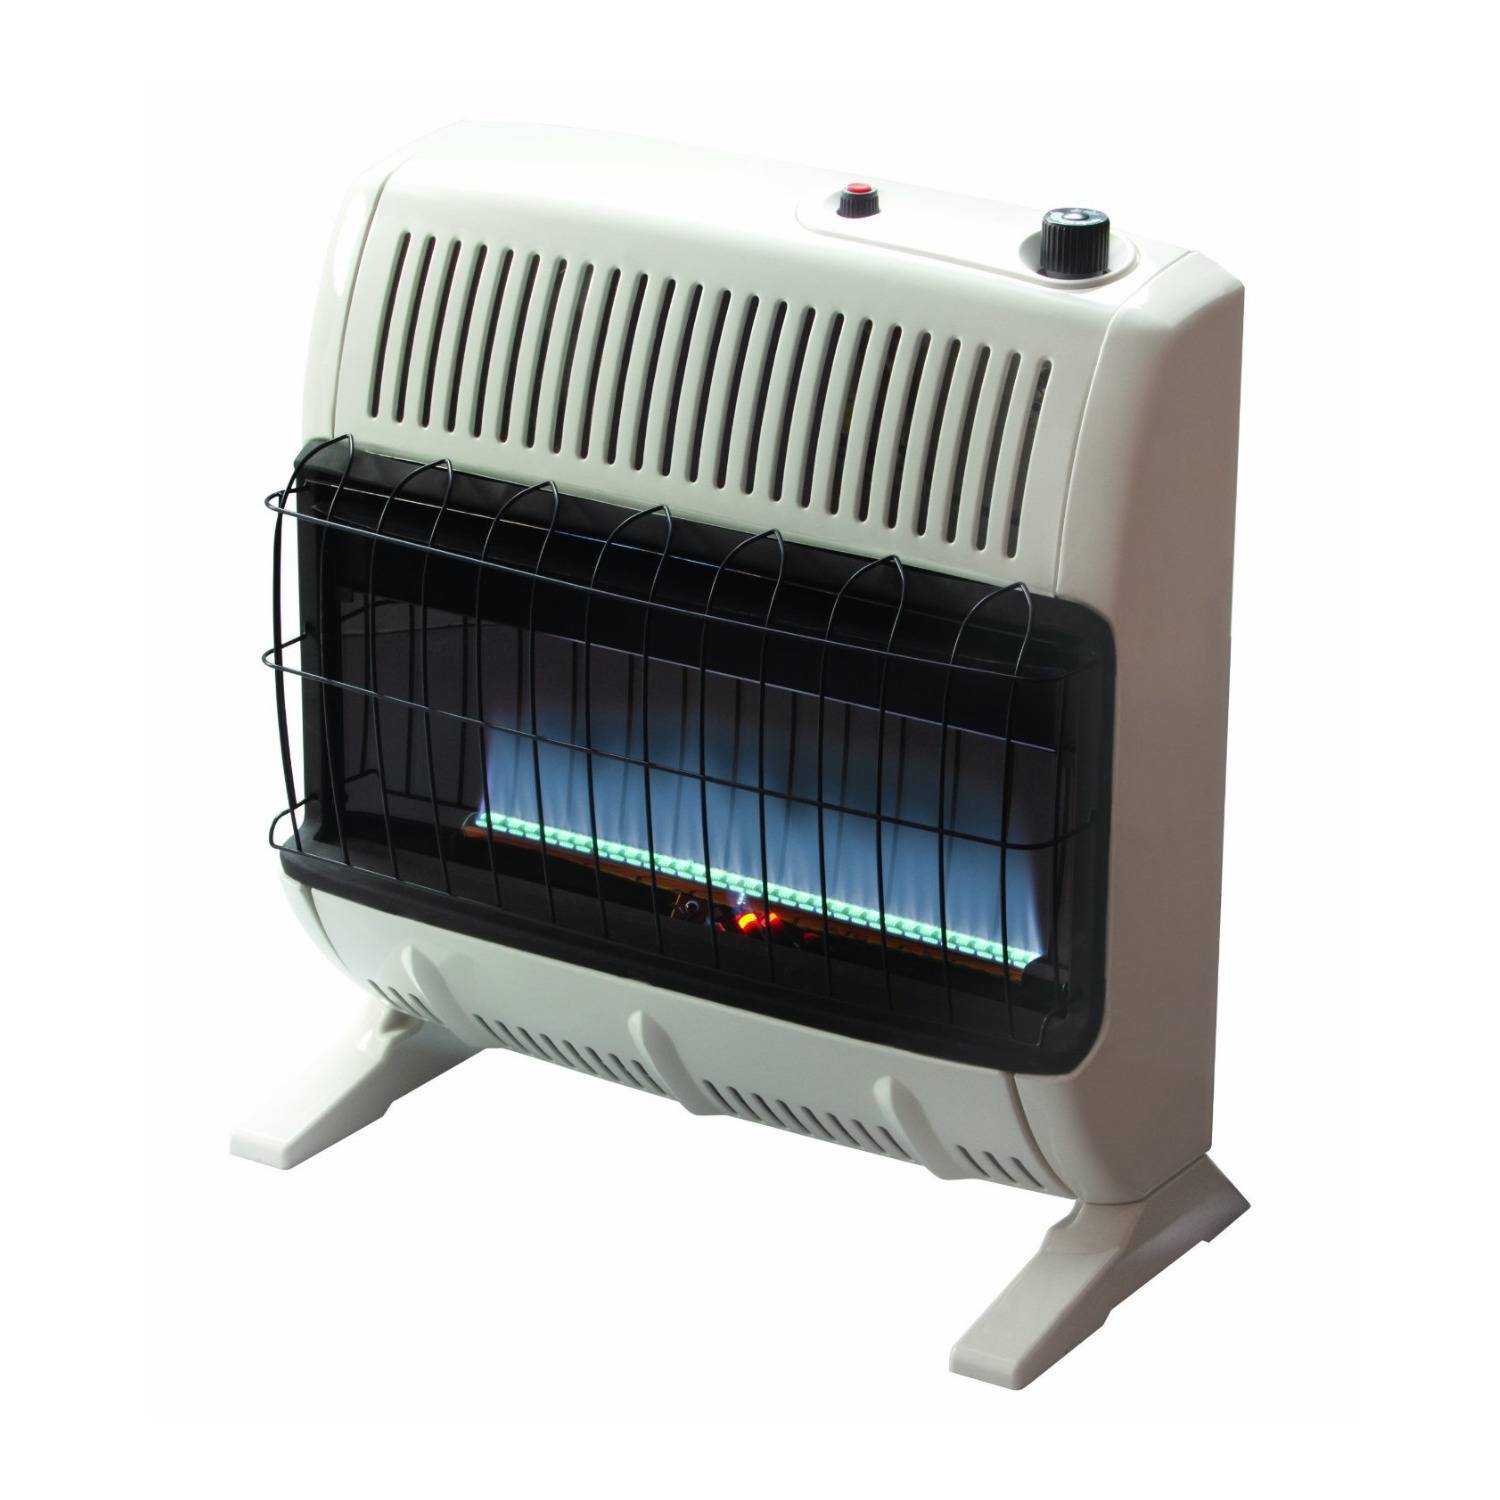 Mr. Heater 30,000 BTU Vent-Free Blue Flame Natural Gas Heater with Blower